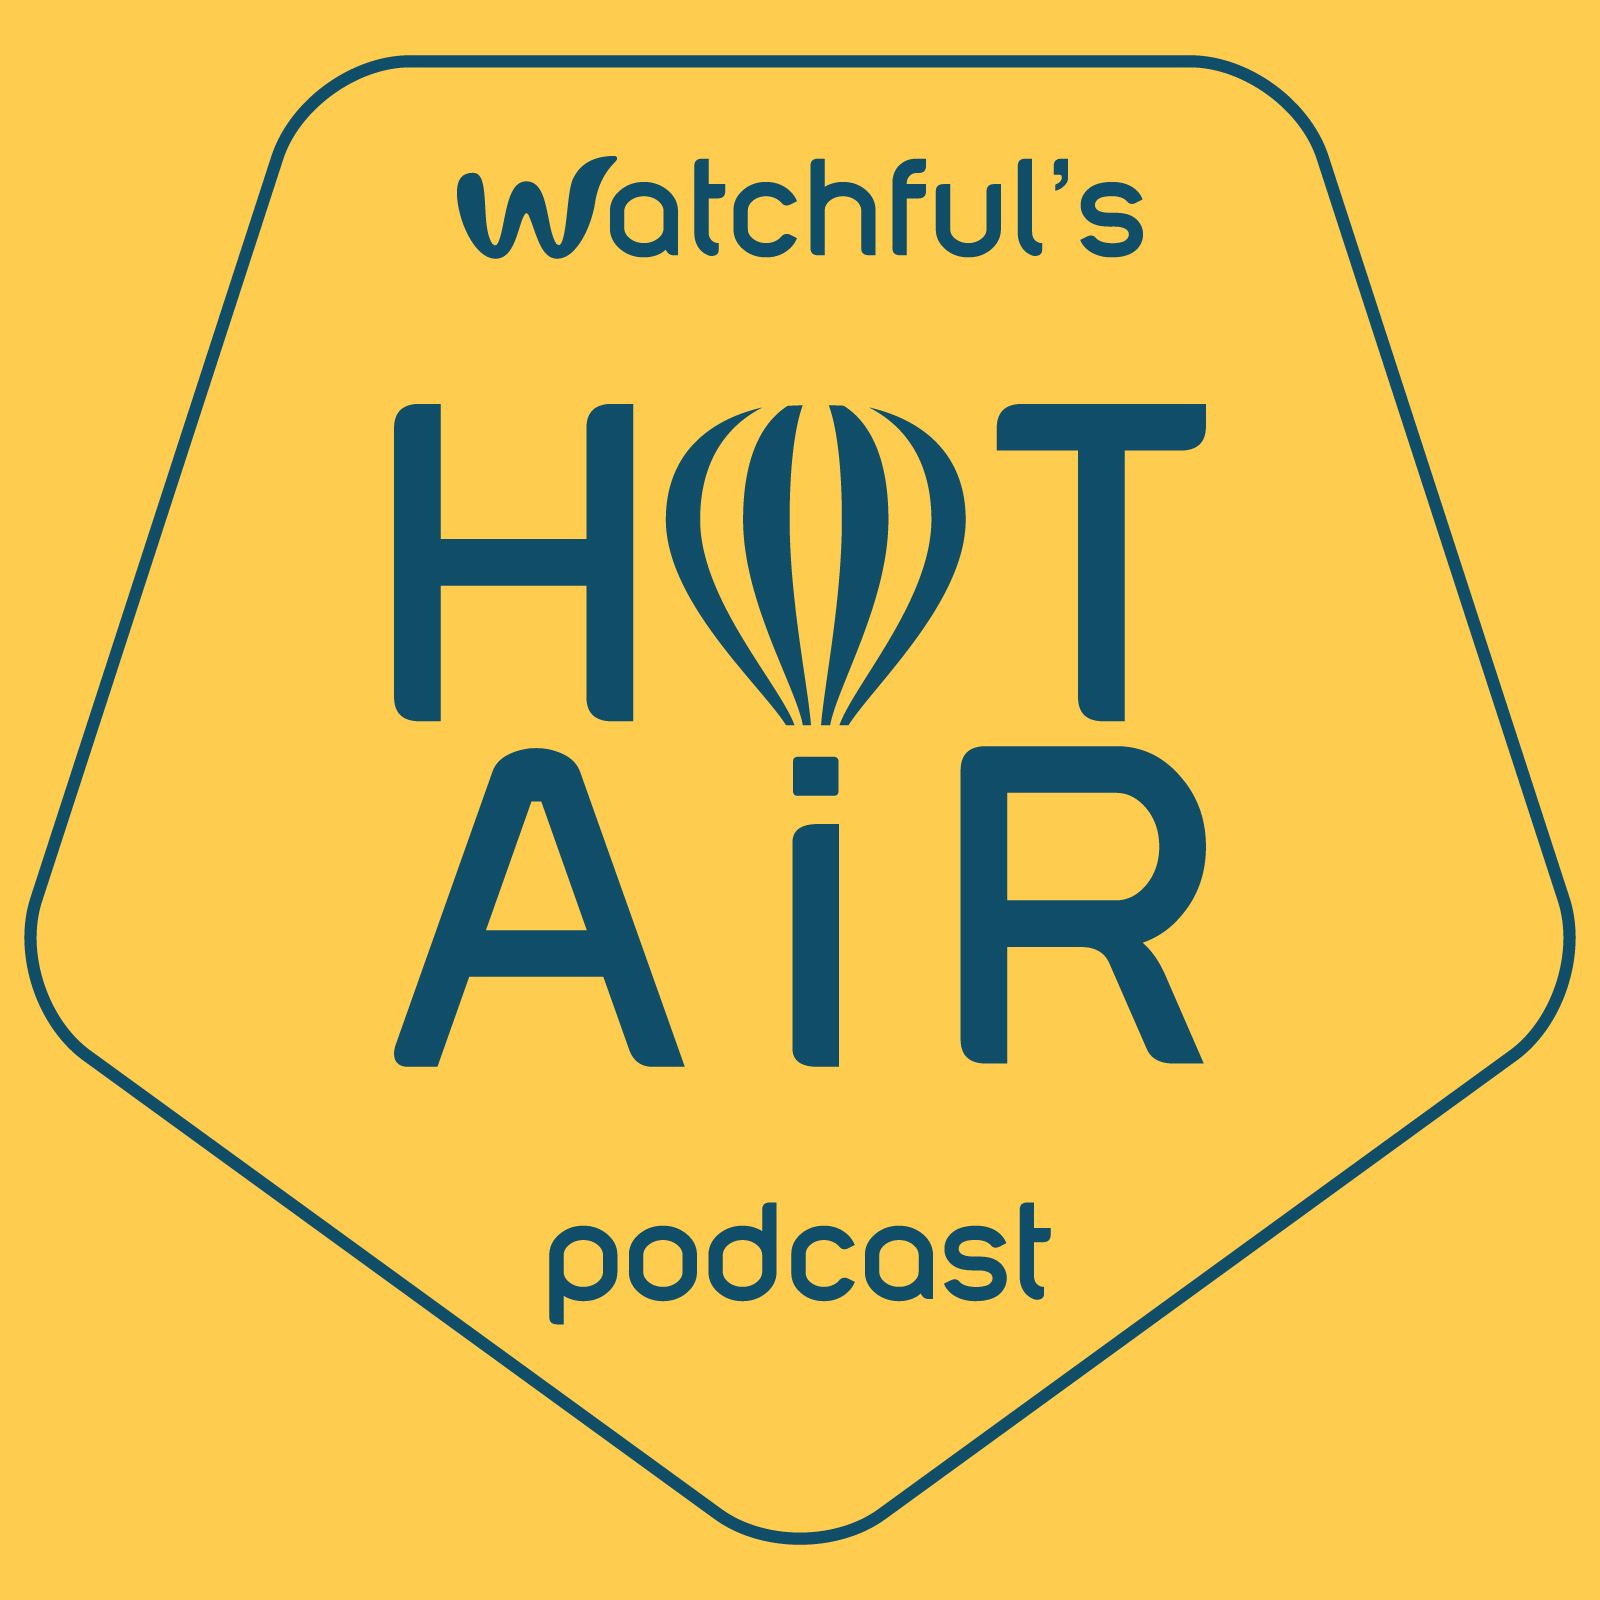 Watchful's Hot Air Podcast